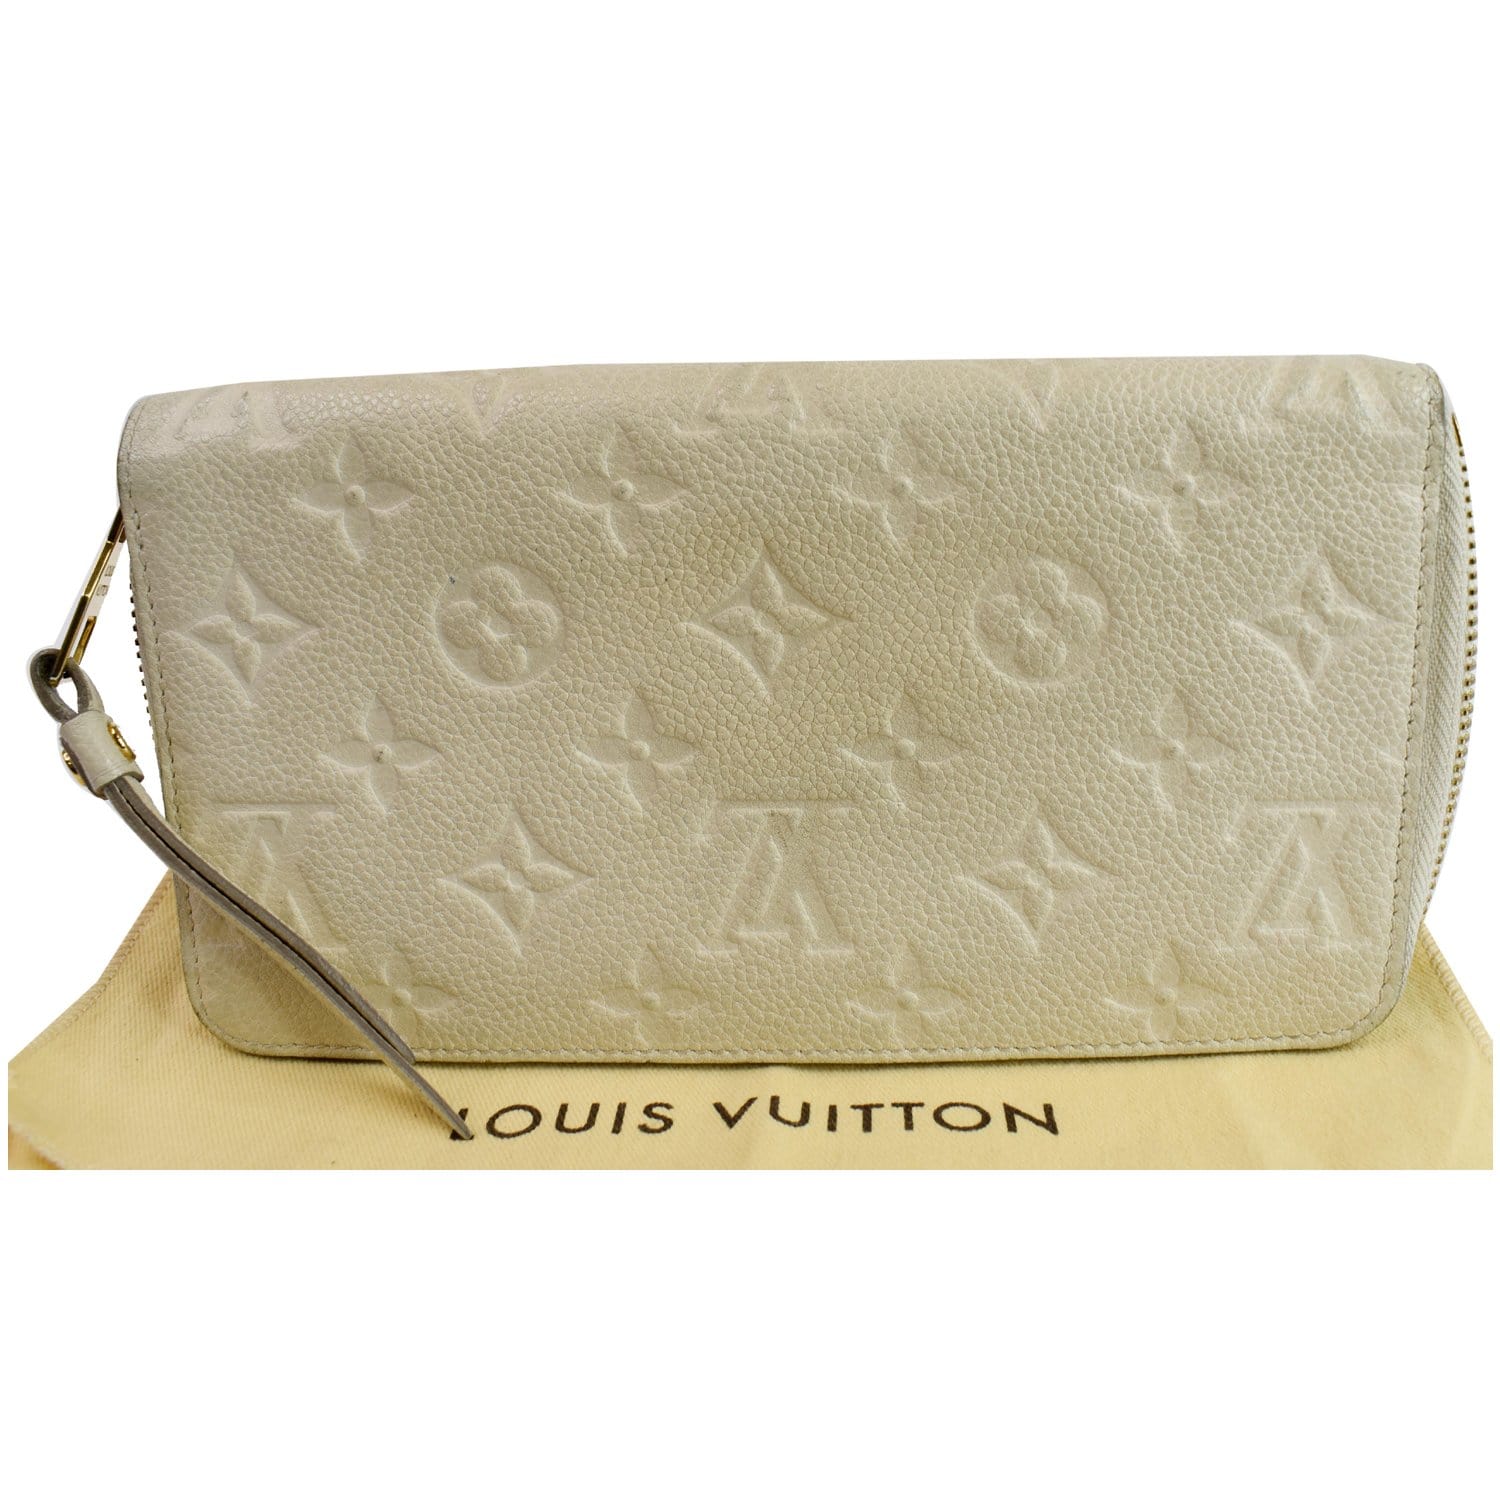 Louis Vuitton Monogram Empreinte Womens Folding Wallets, White, One Size (Stock Confirmation Required)